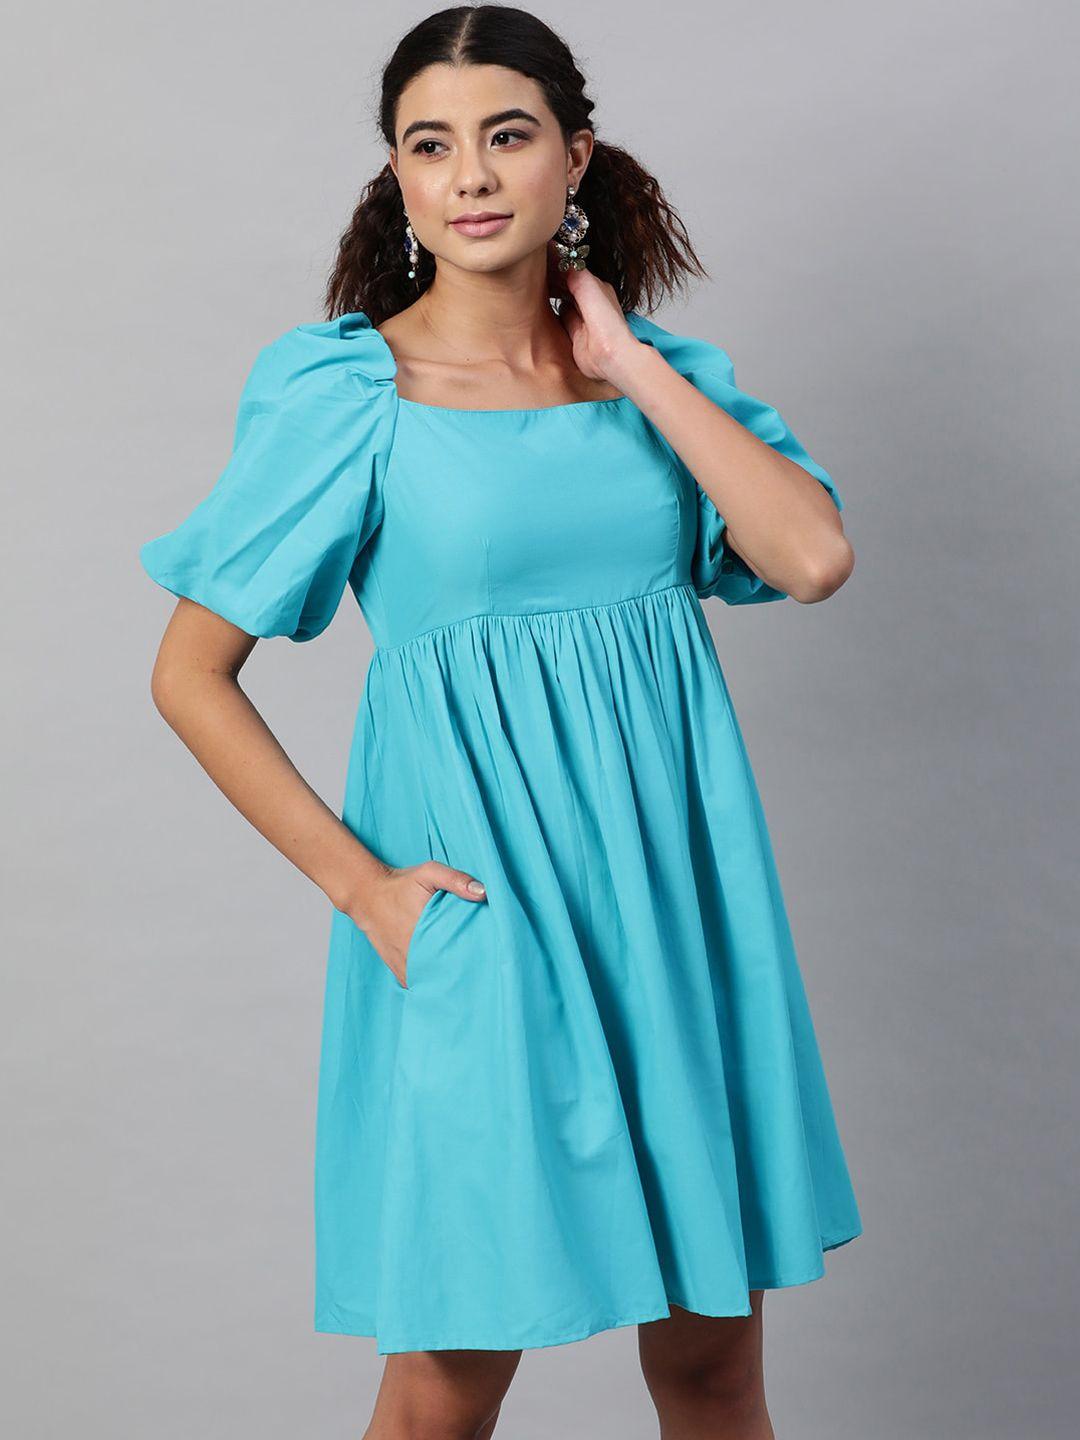 street 9 turquoise blue puff sleeves empire dress